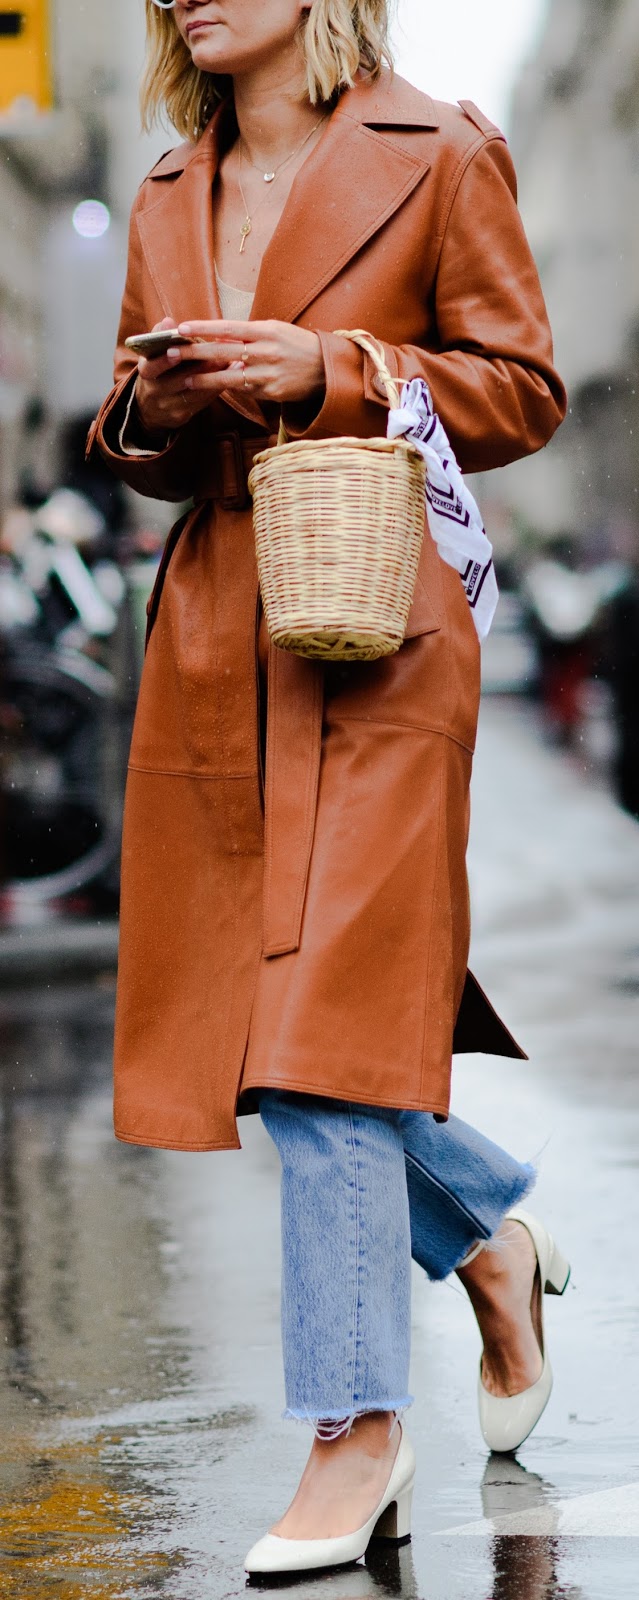 how to wear with a brown leather coat : bag + jeans + heels